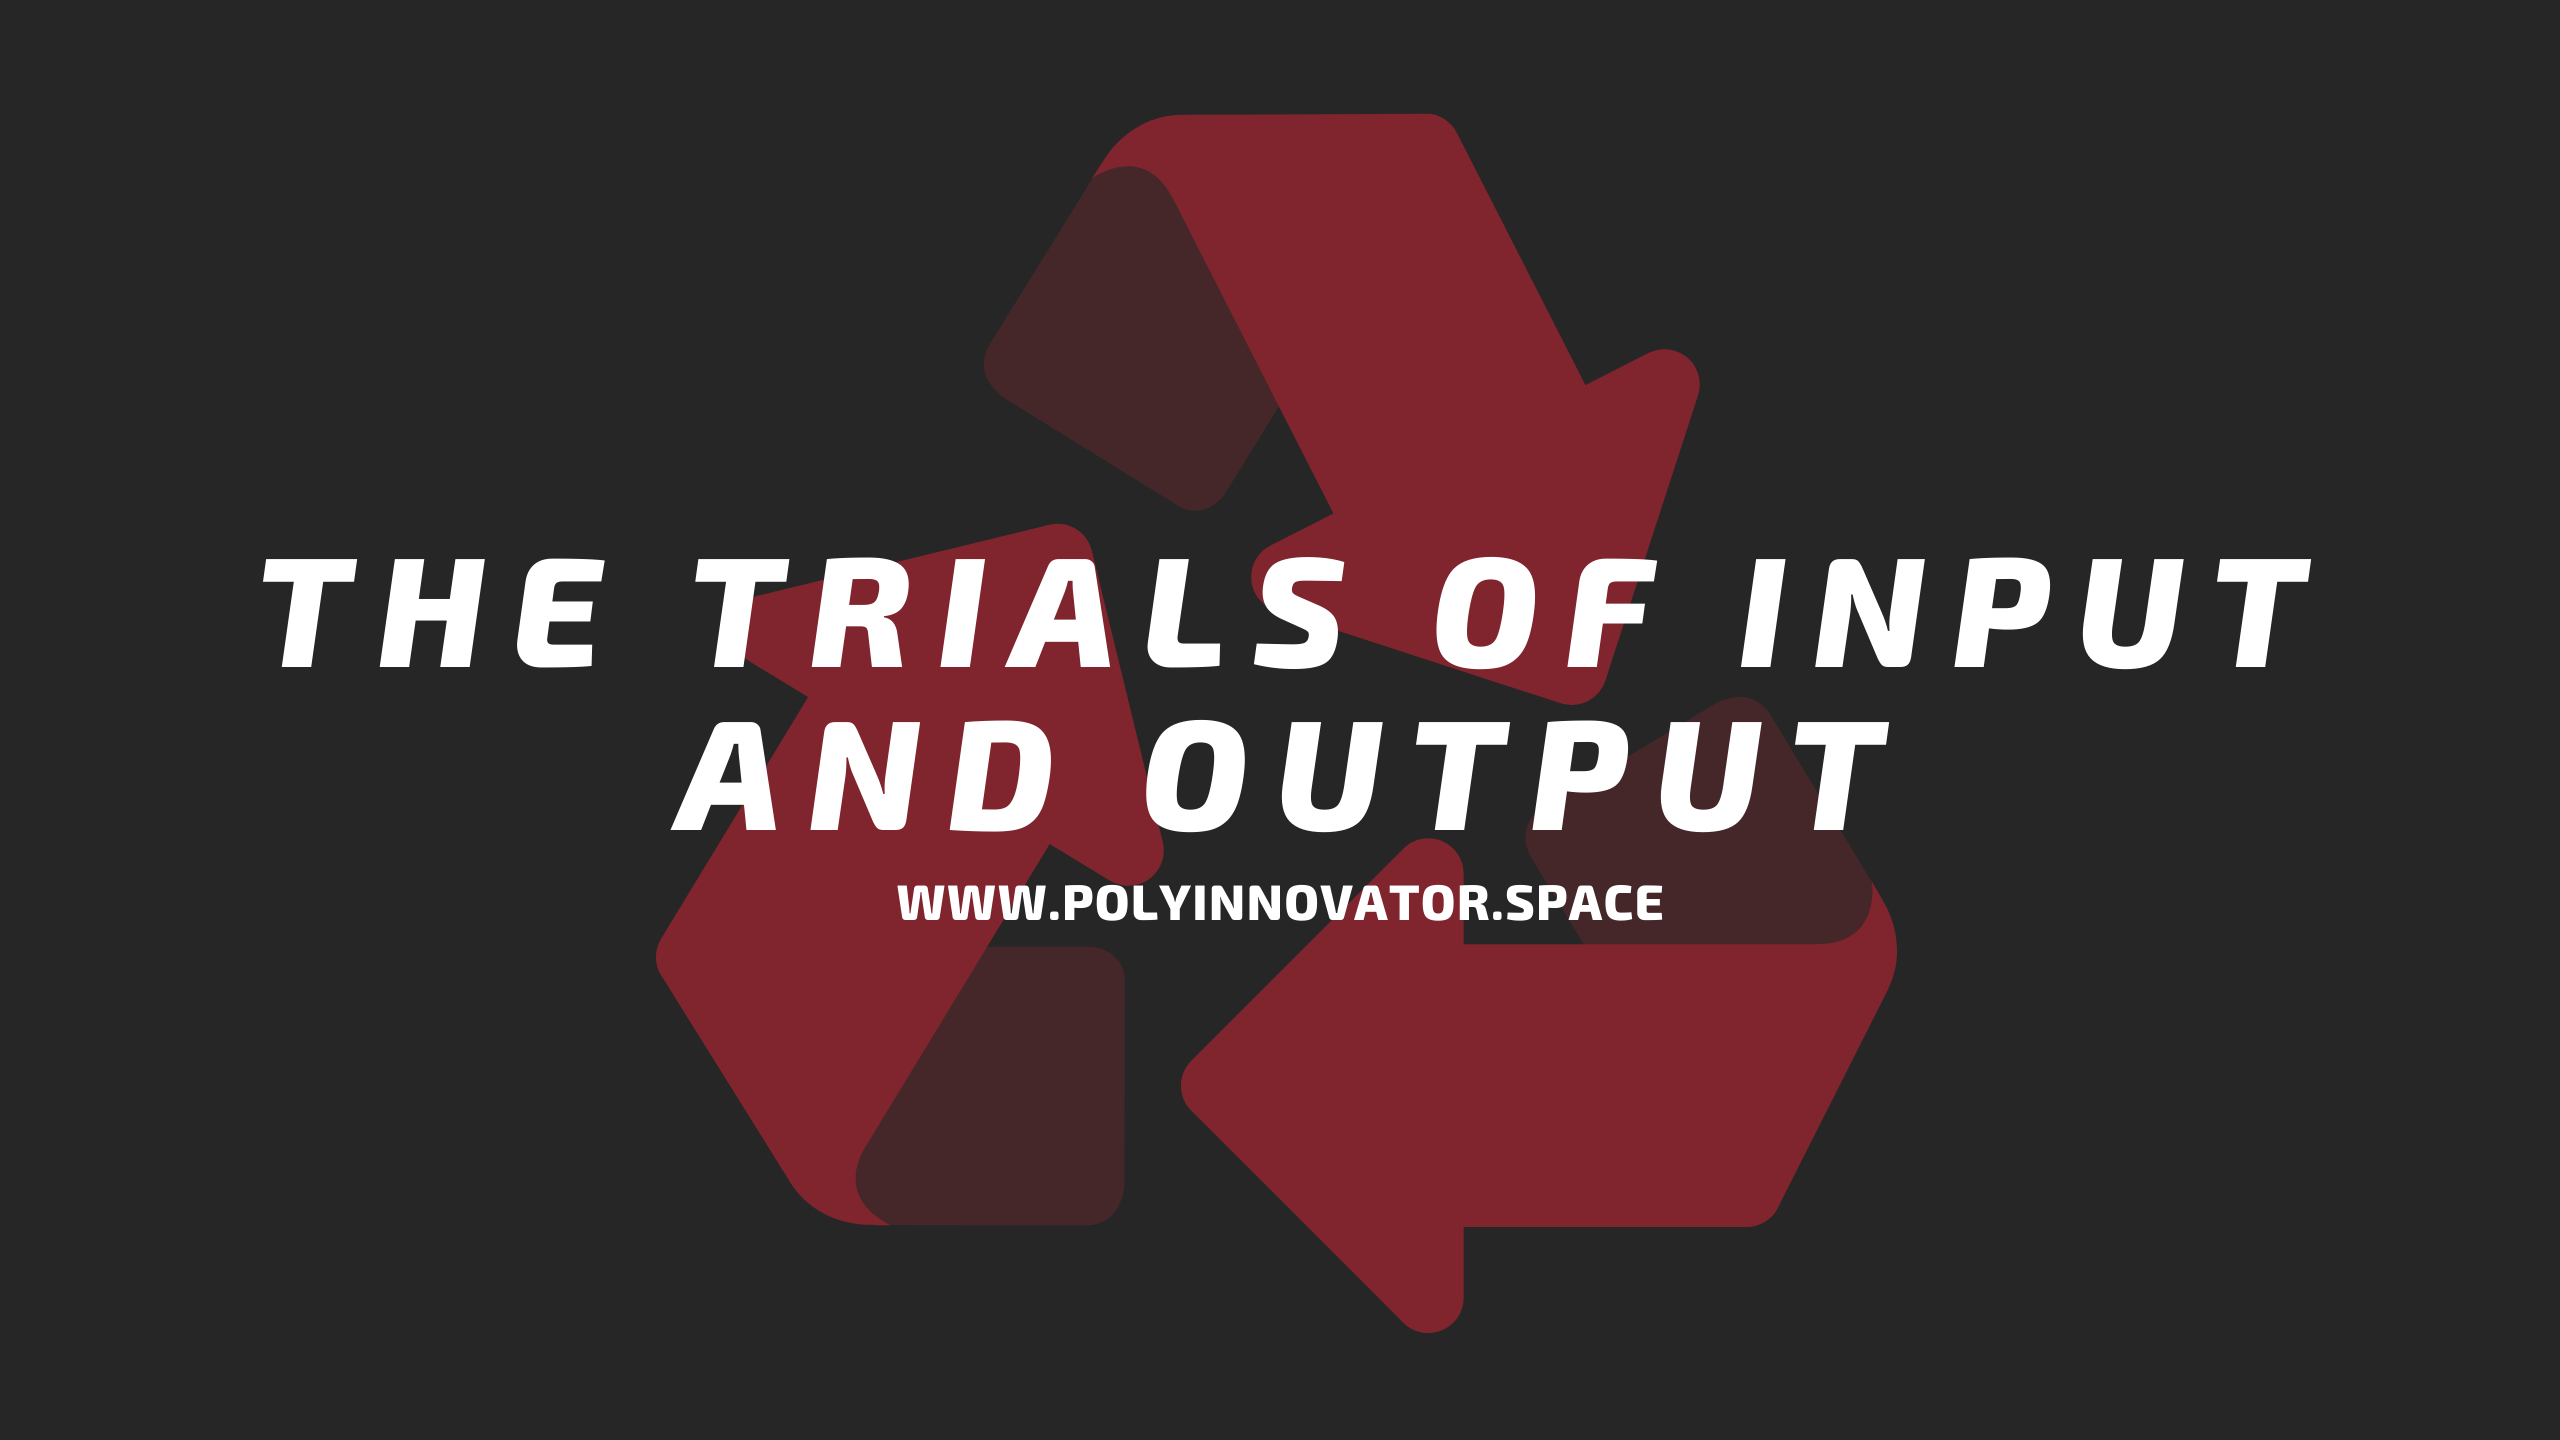 The Trials of Input and Output